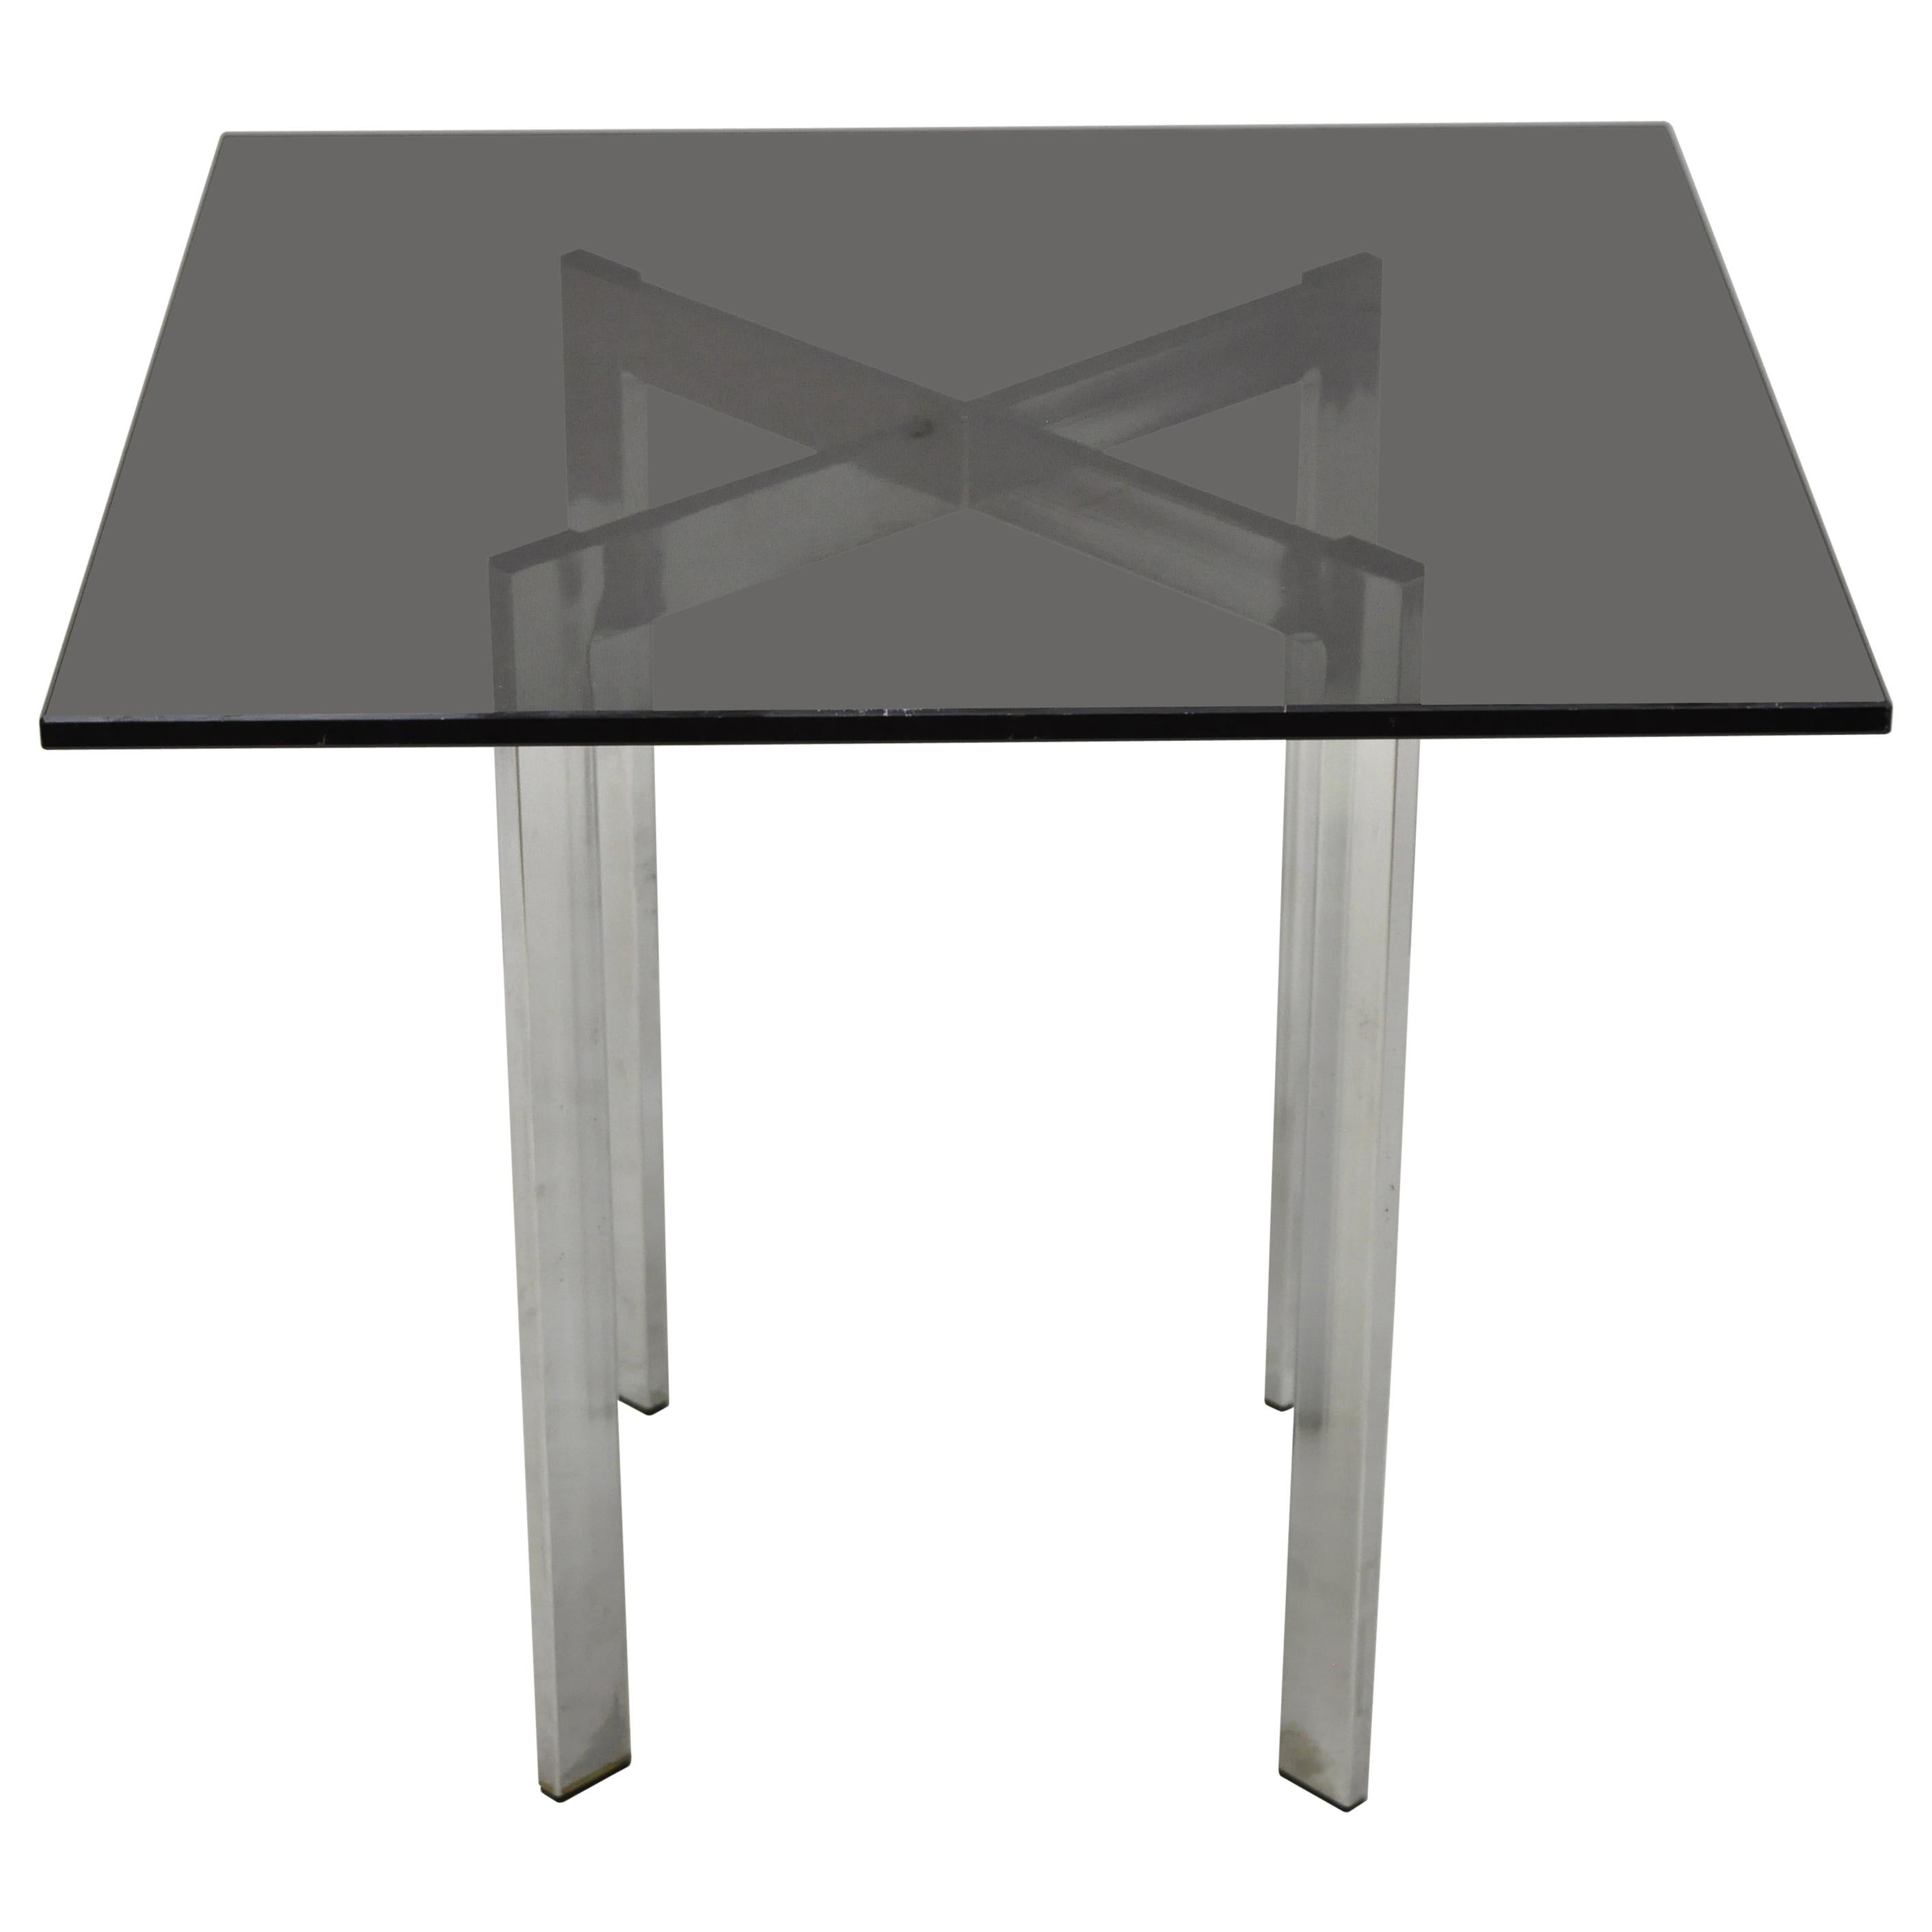 Mid-20th Century Chrome X-Frame Smoked Glass Barcelona Style Side End Table For Sale